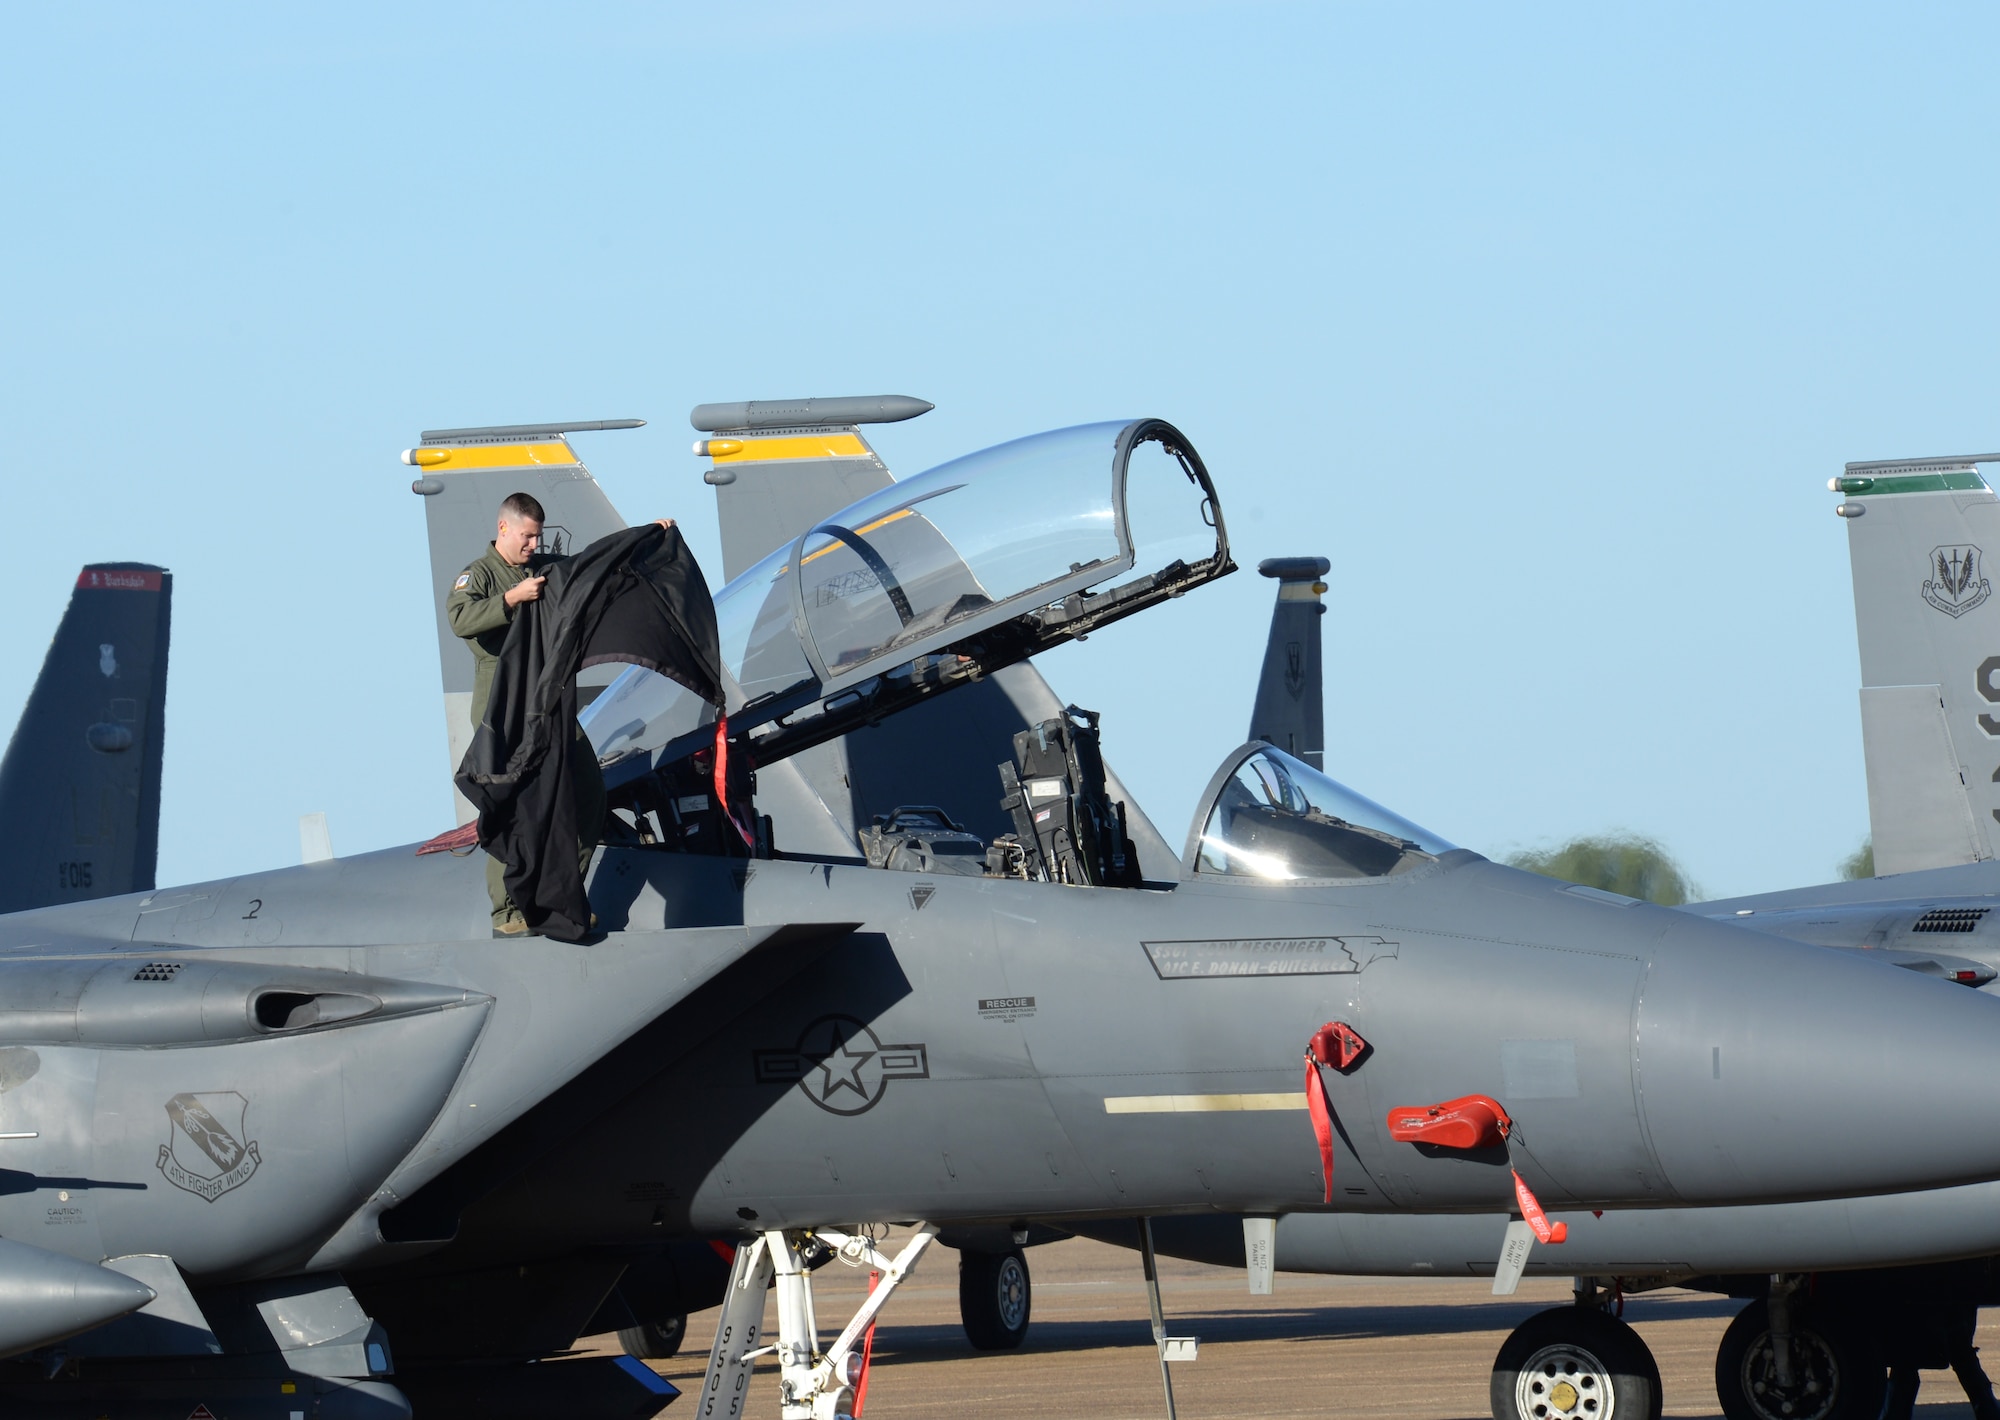 An Airman performs post-flight procedures on an F-15E Strike Eagle at Barksdale Air Force Base, La., Oct. 1, 2015. Fighter and refueler aircraft from the 916th Air Refueling Wing and the 4th Fighter Wing of Seymour Johnson AFB, N.C., shared the flightline amid Hurricane Joaquin concerns. (U.S. Air Force photo/Airman 1st Class Curt Beach)